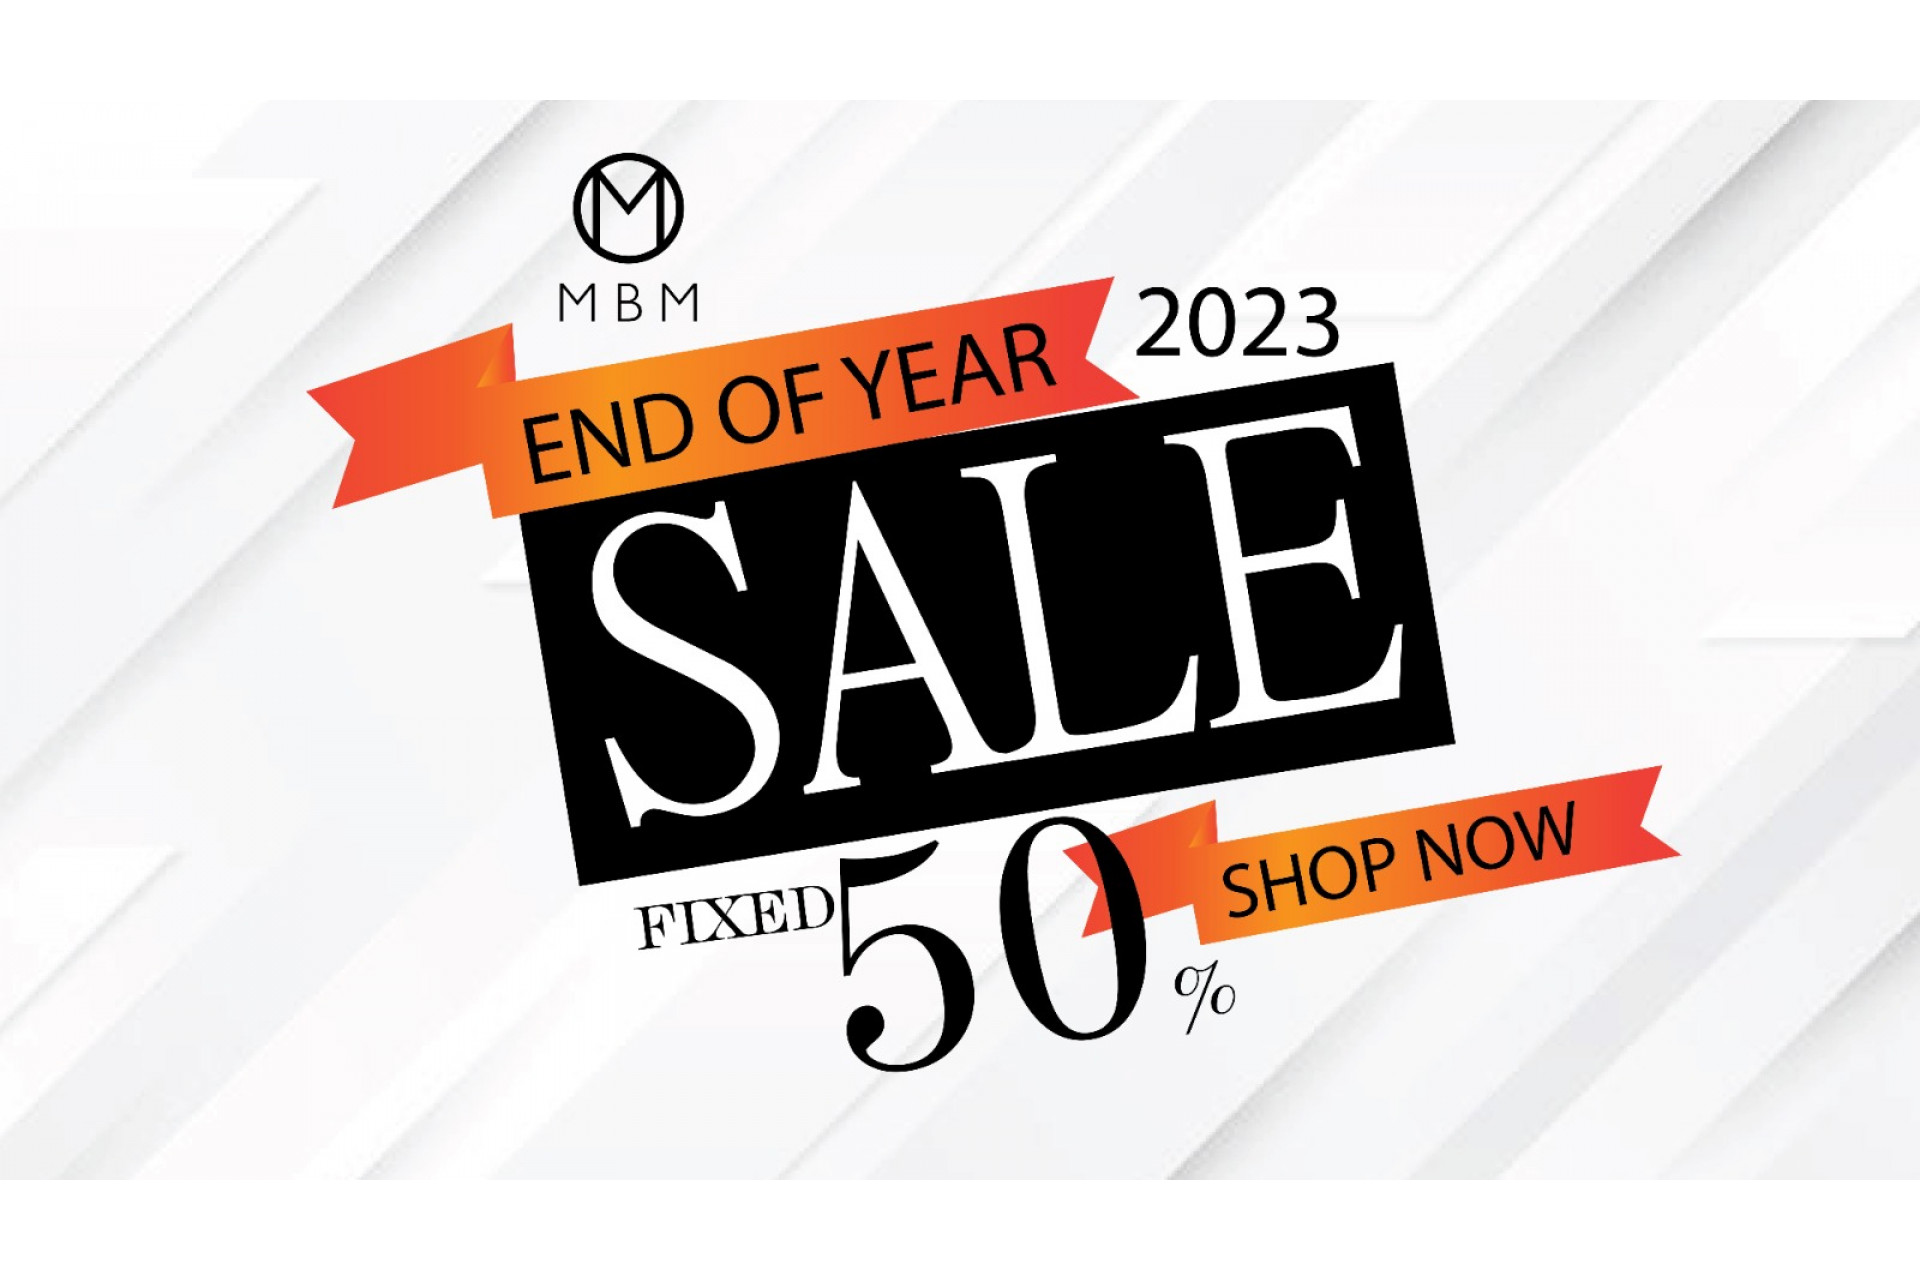 END OF YEAR SALE 2023